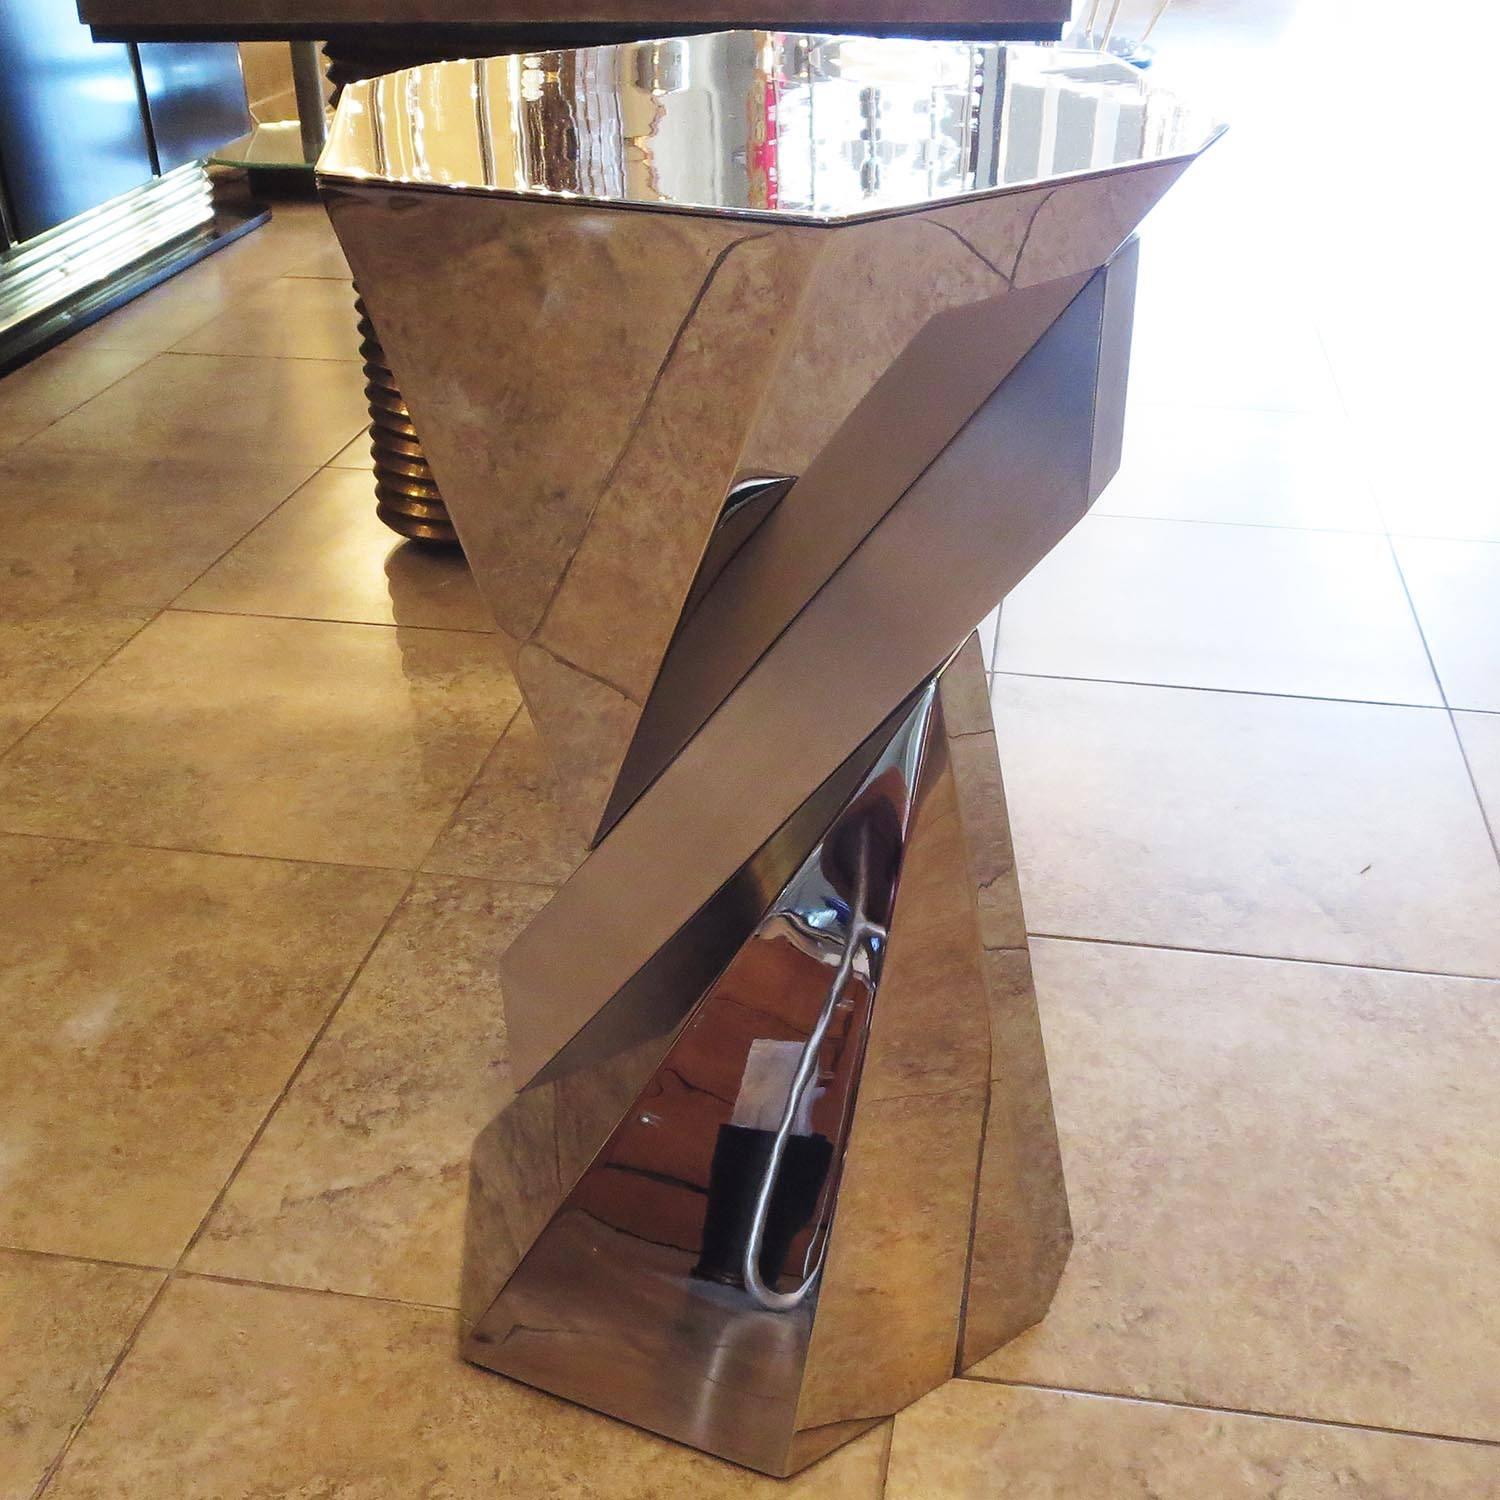 Streamlined Moderne Cubist Pedestal or Side Table in Mirrored Stainless Steel